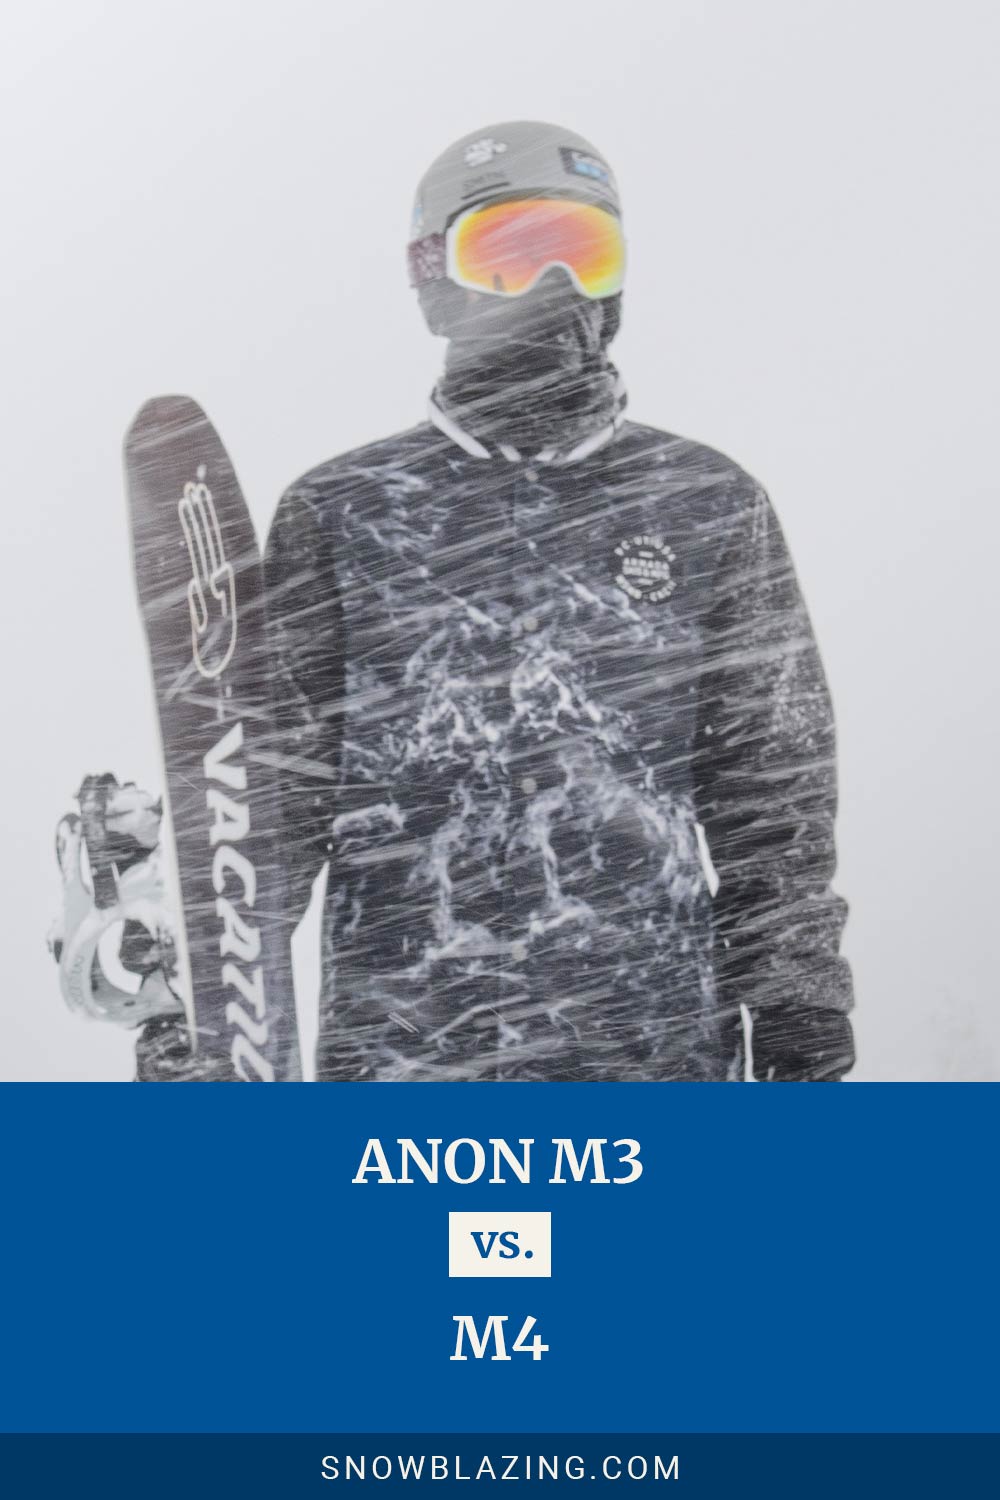 Man wearing snowboarding helmet with a snowboard in hand - Anon M3 vs. M4.